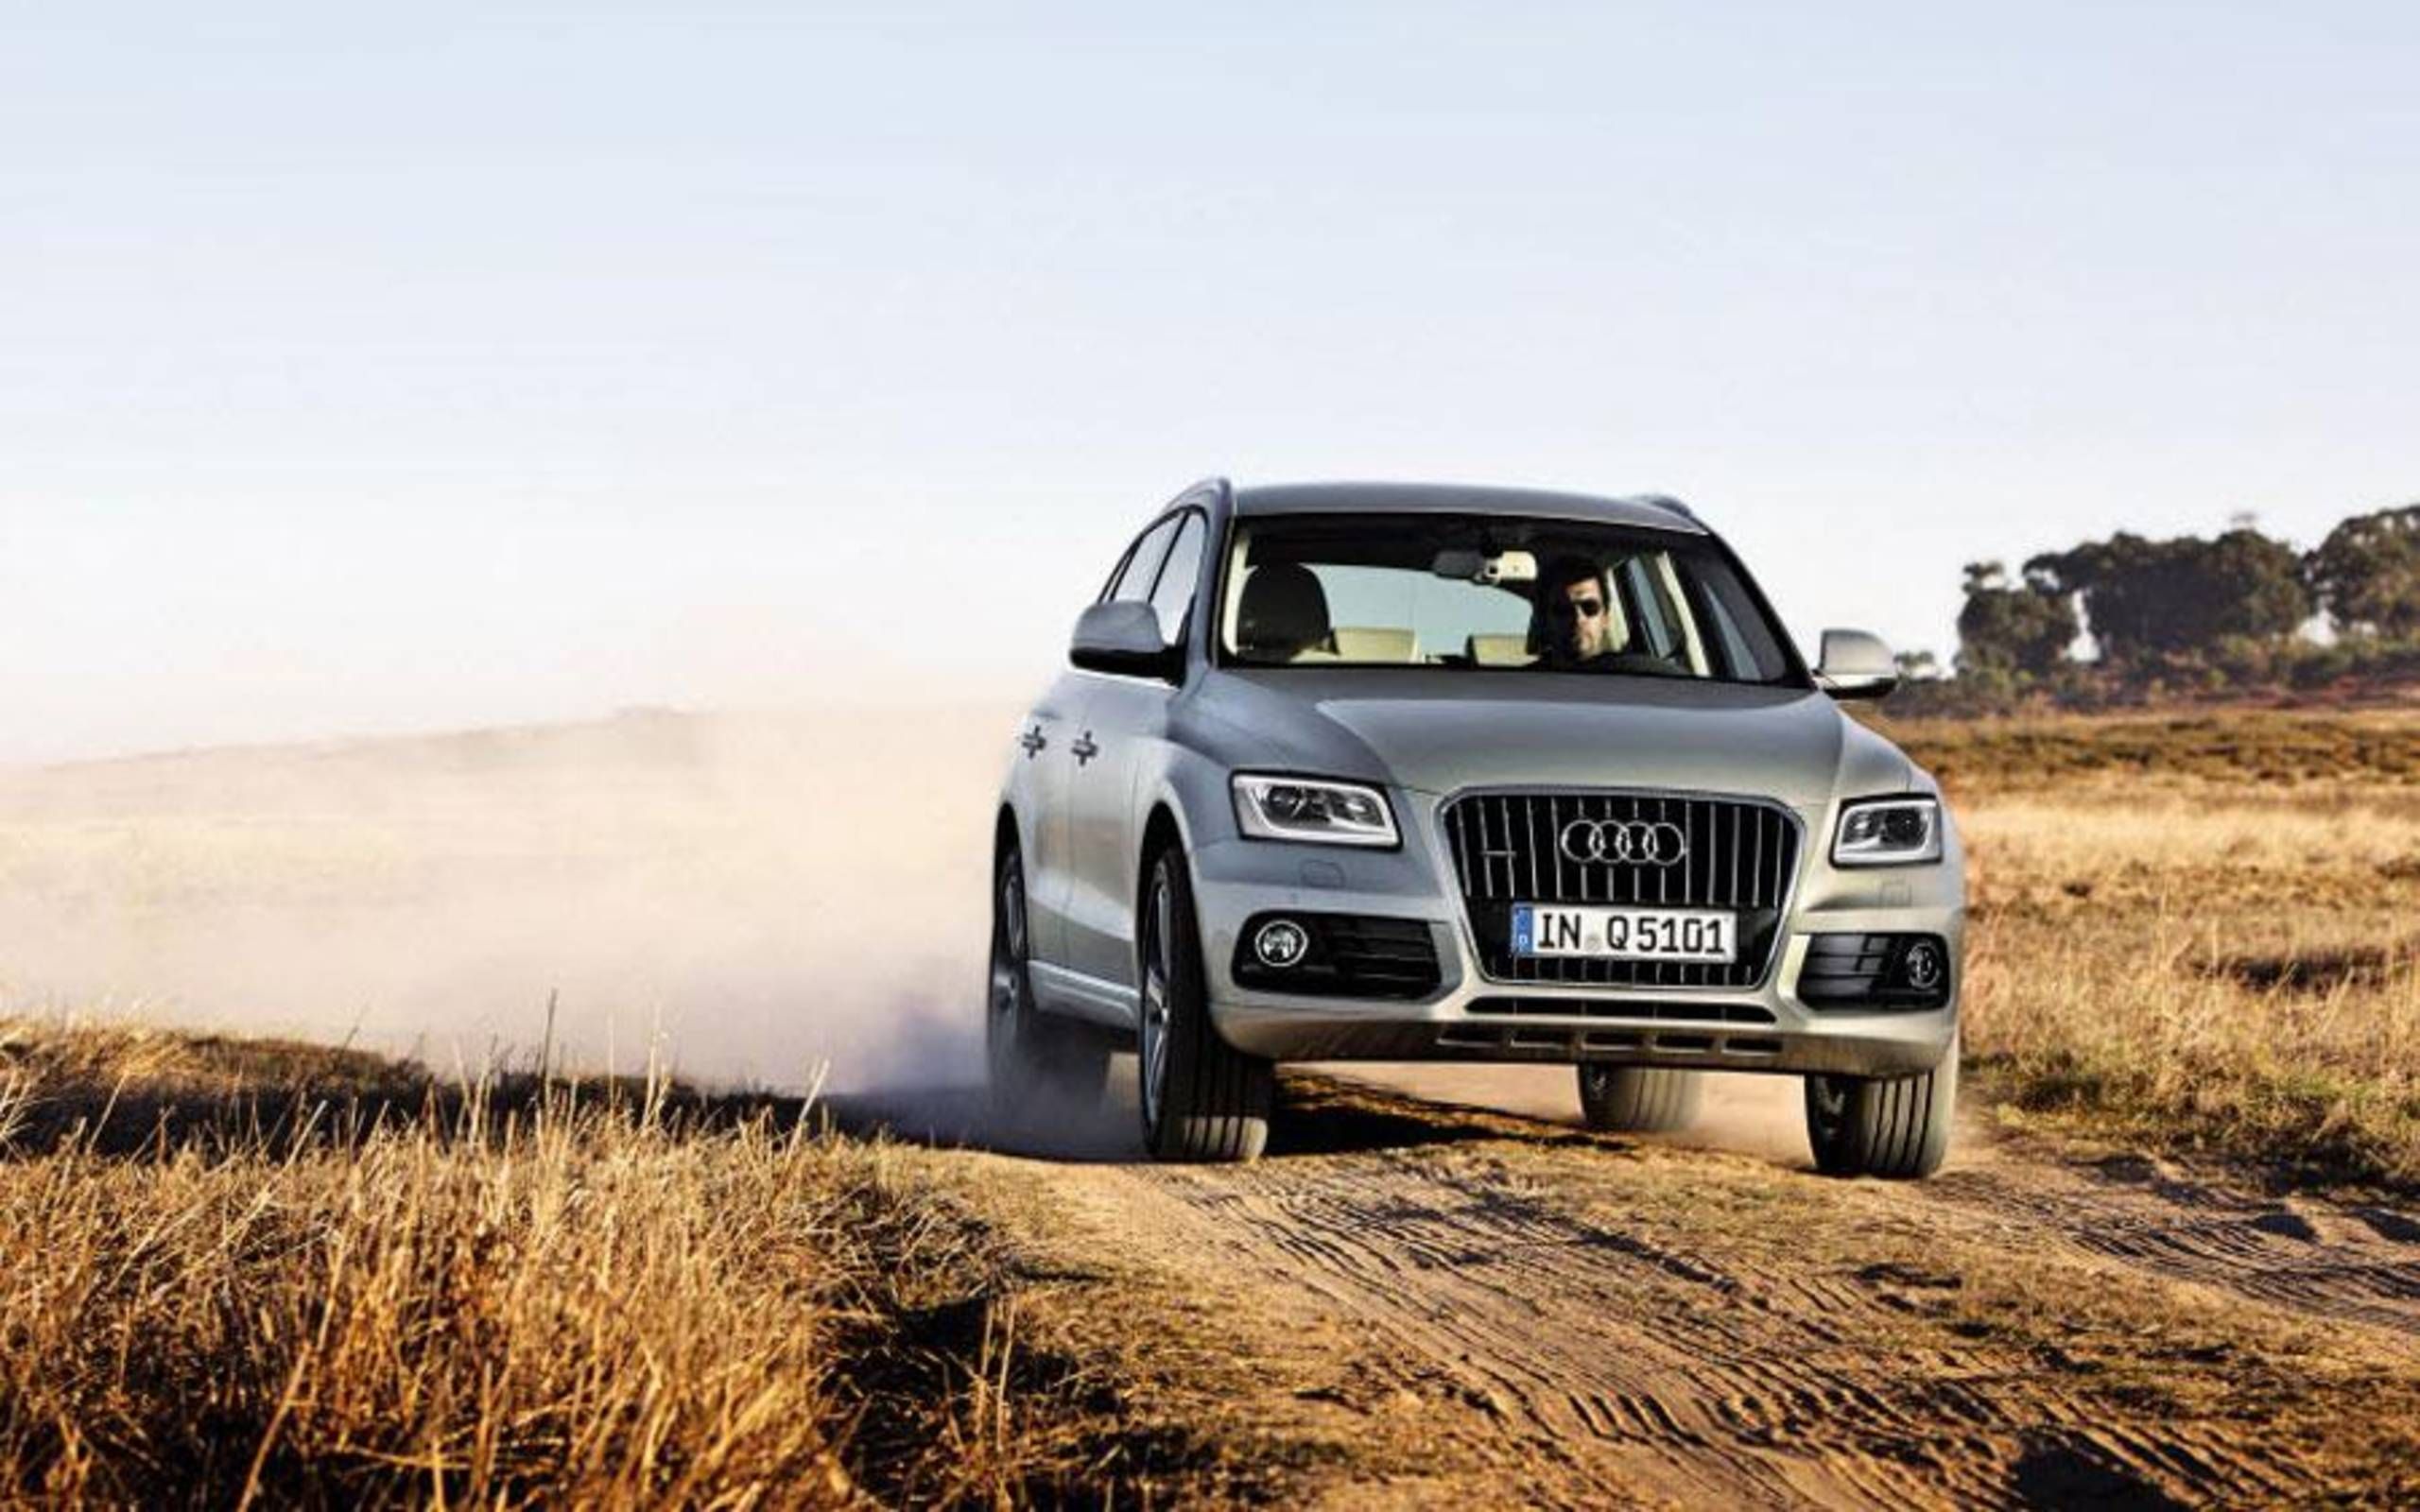 The 2013 Audi Q5 improves in ways you don't see